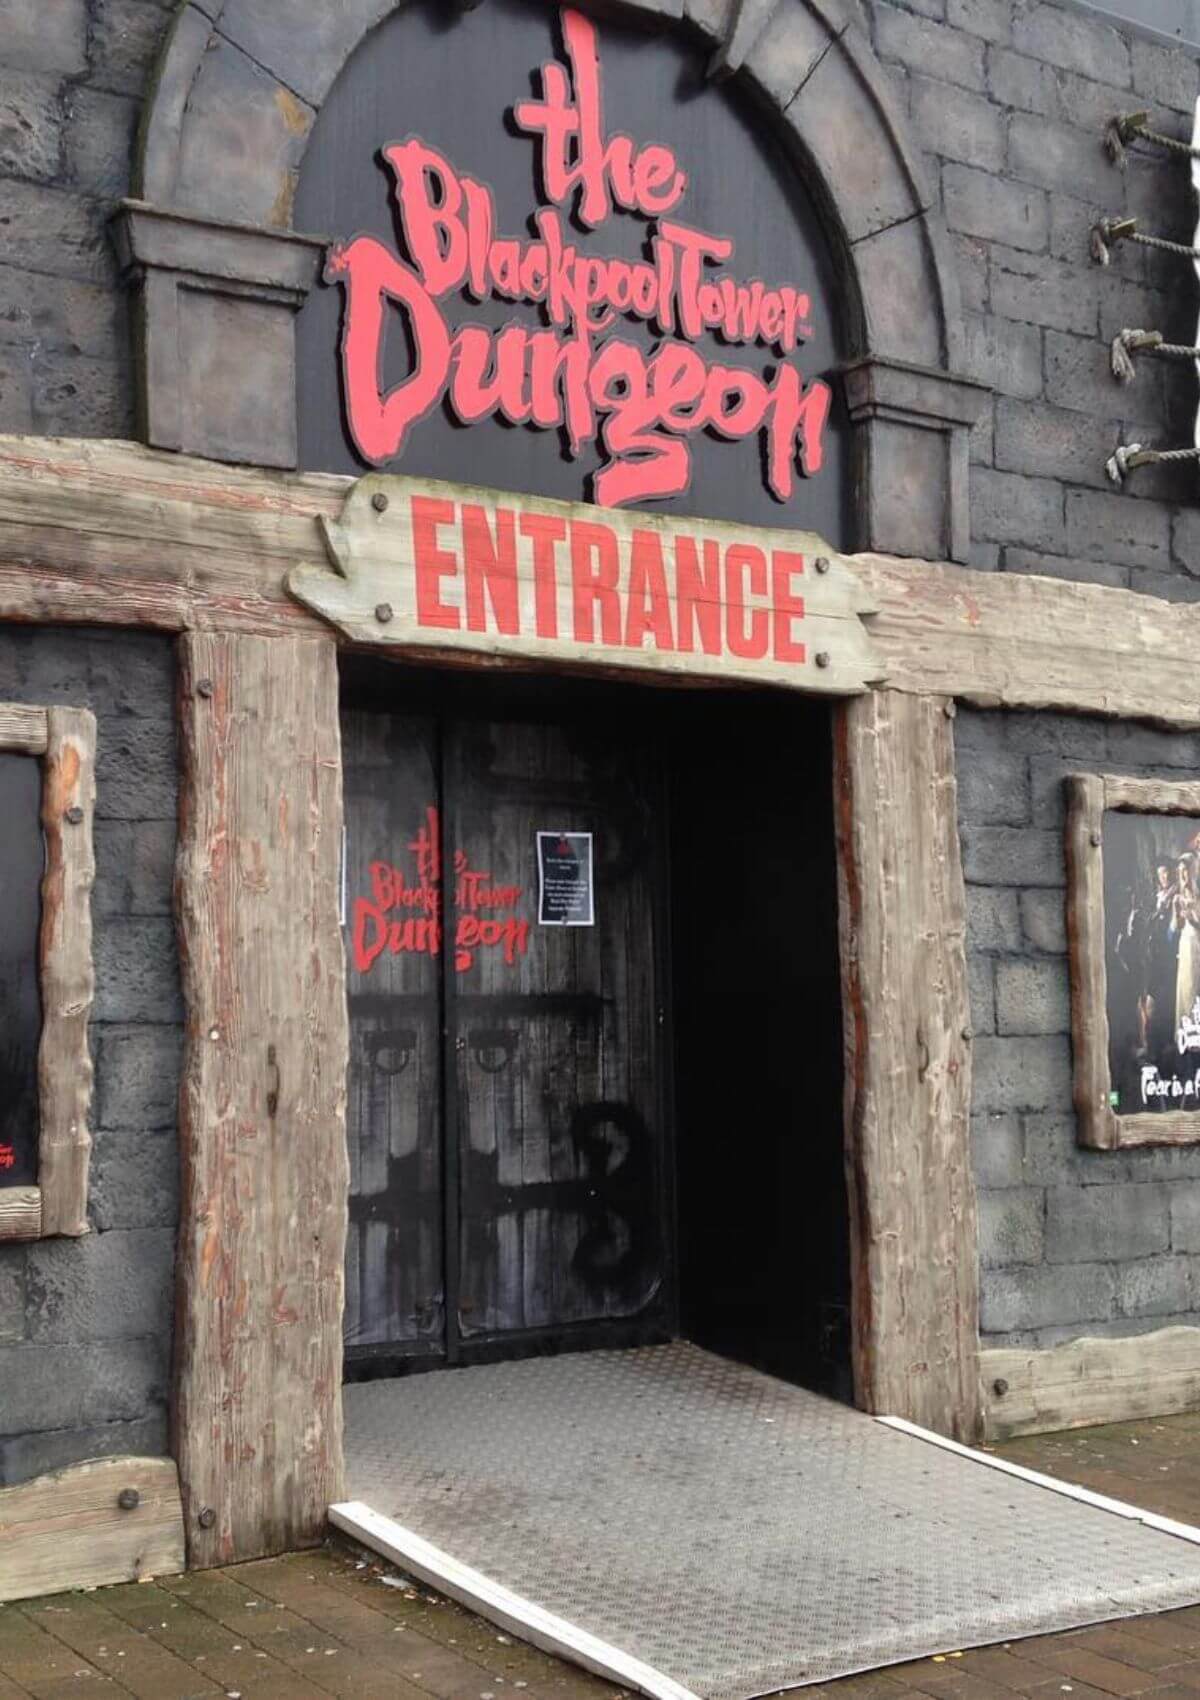 Take the family to the Blackpool Tower Dungeon